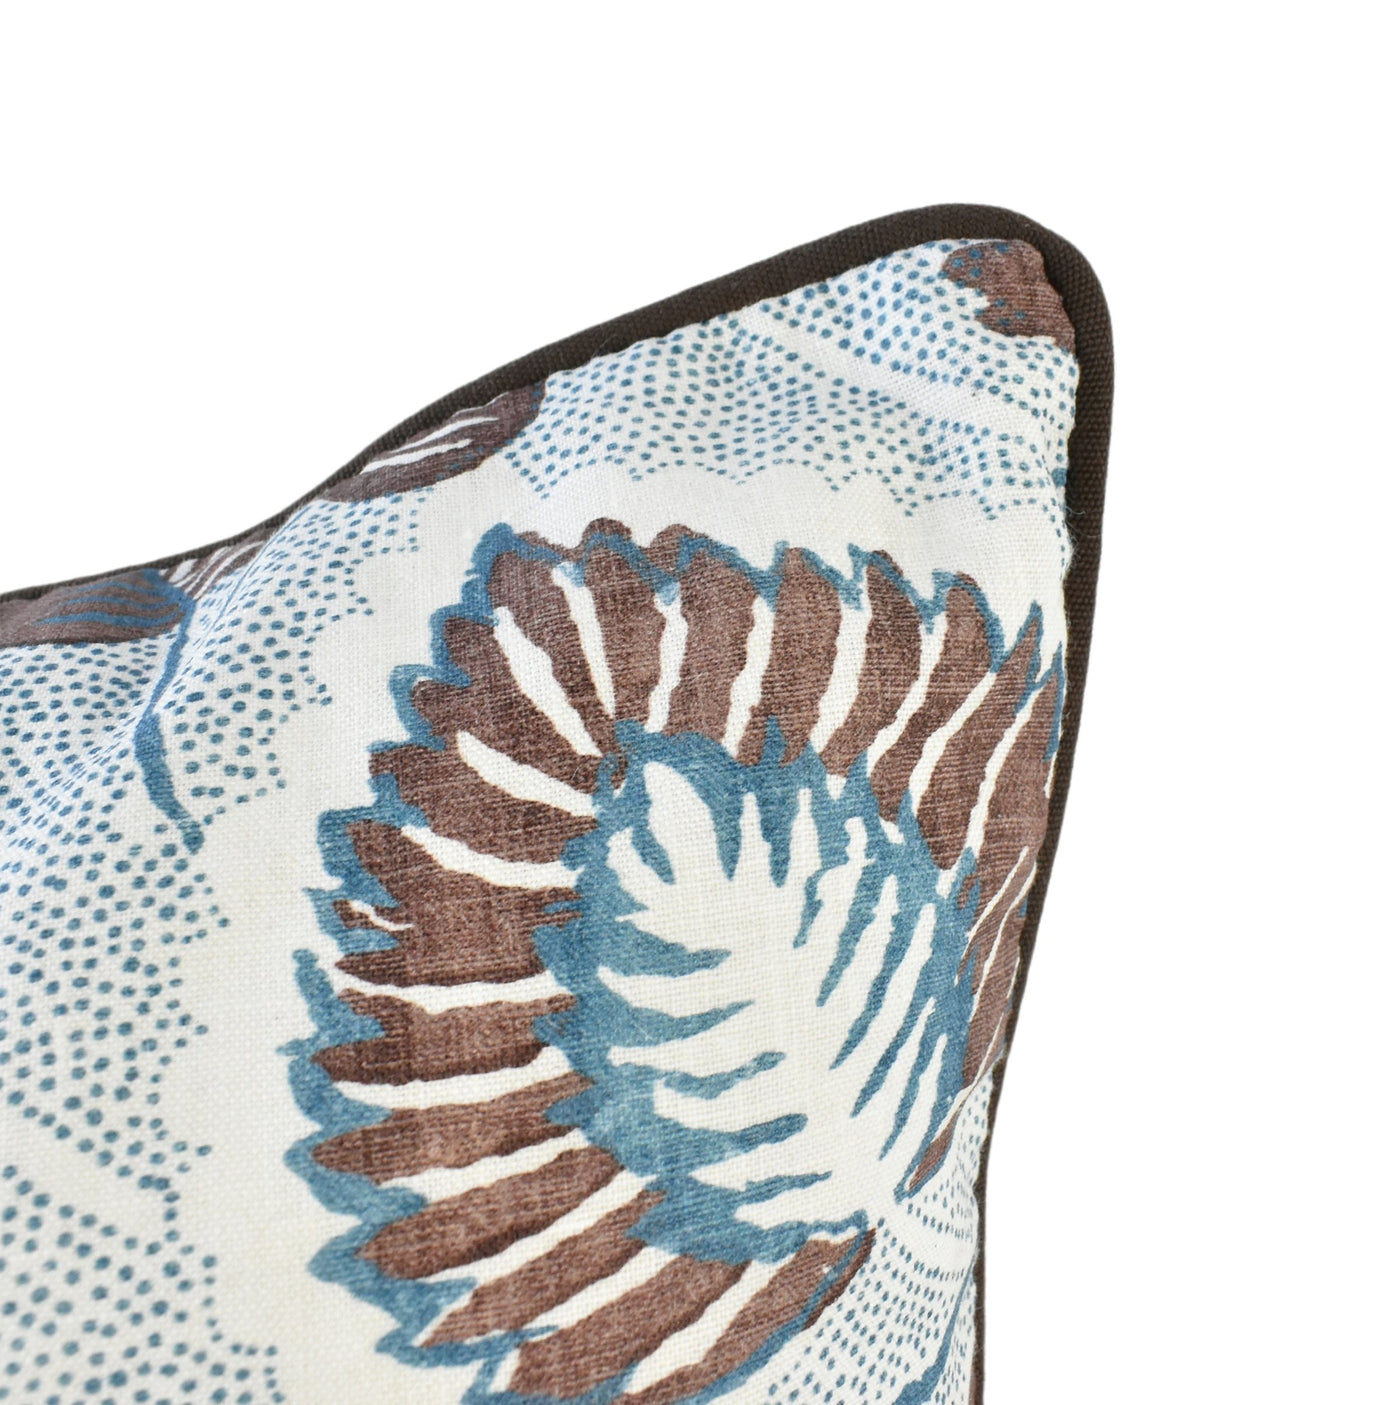 Close up image of floral pattern with petrol blue tones, chocolate brown, white and piped detailing